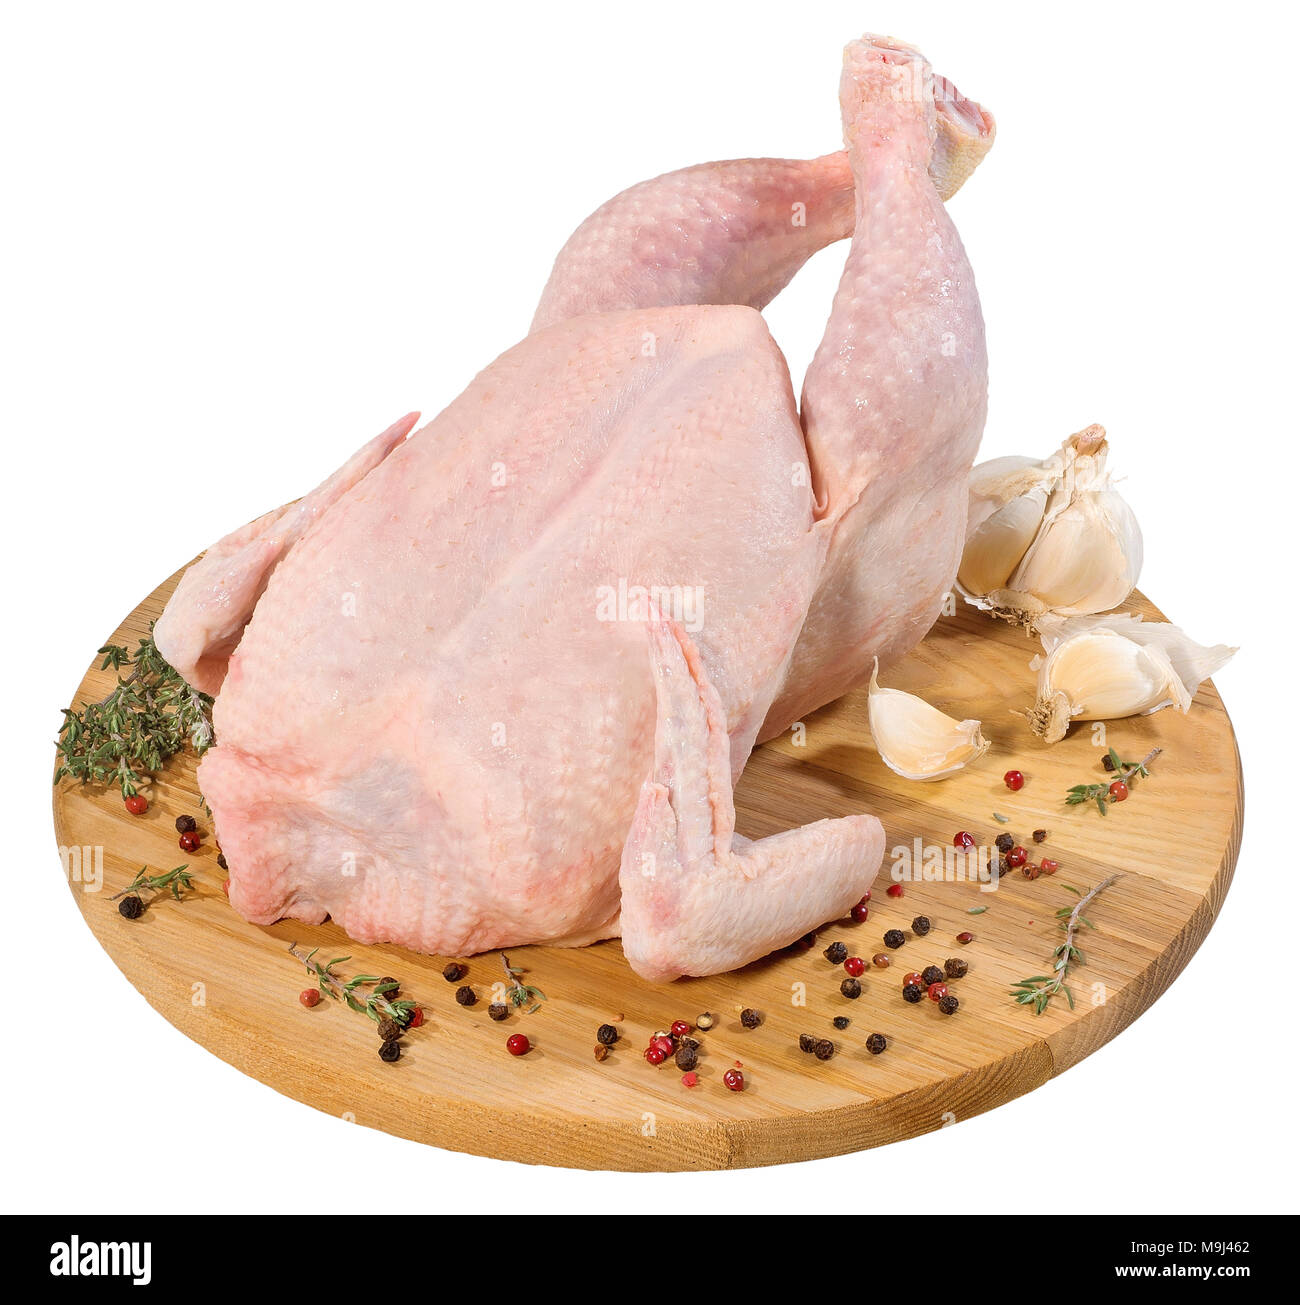 Raw Chicken Food Image & Photo (Free Trial)